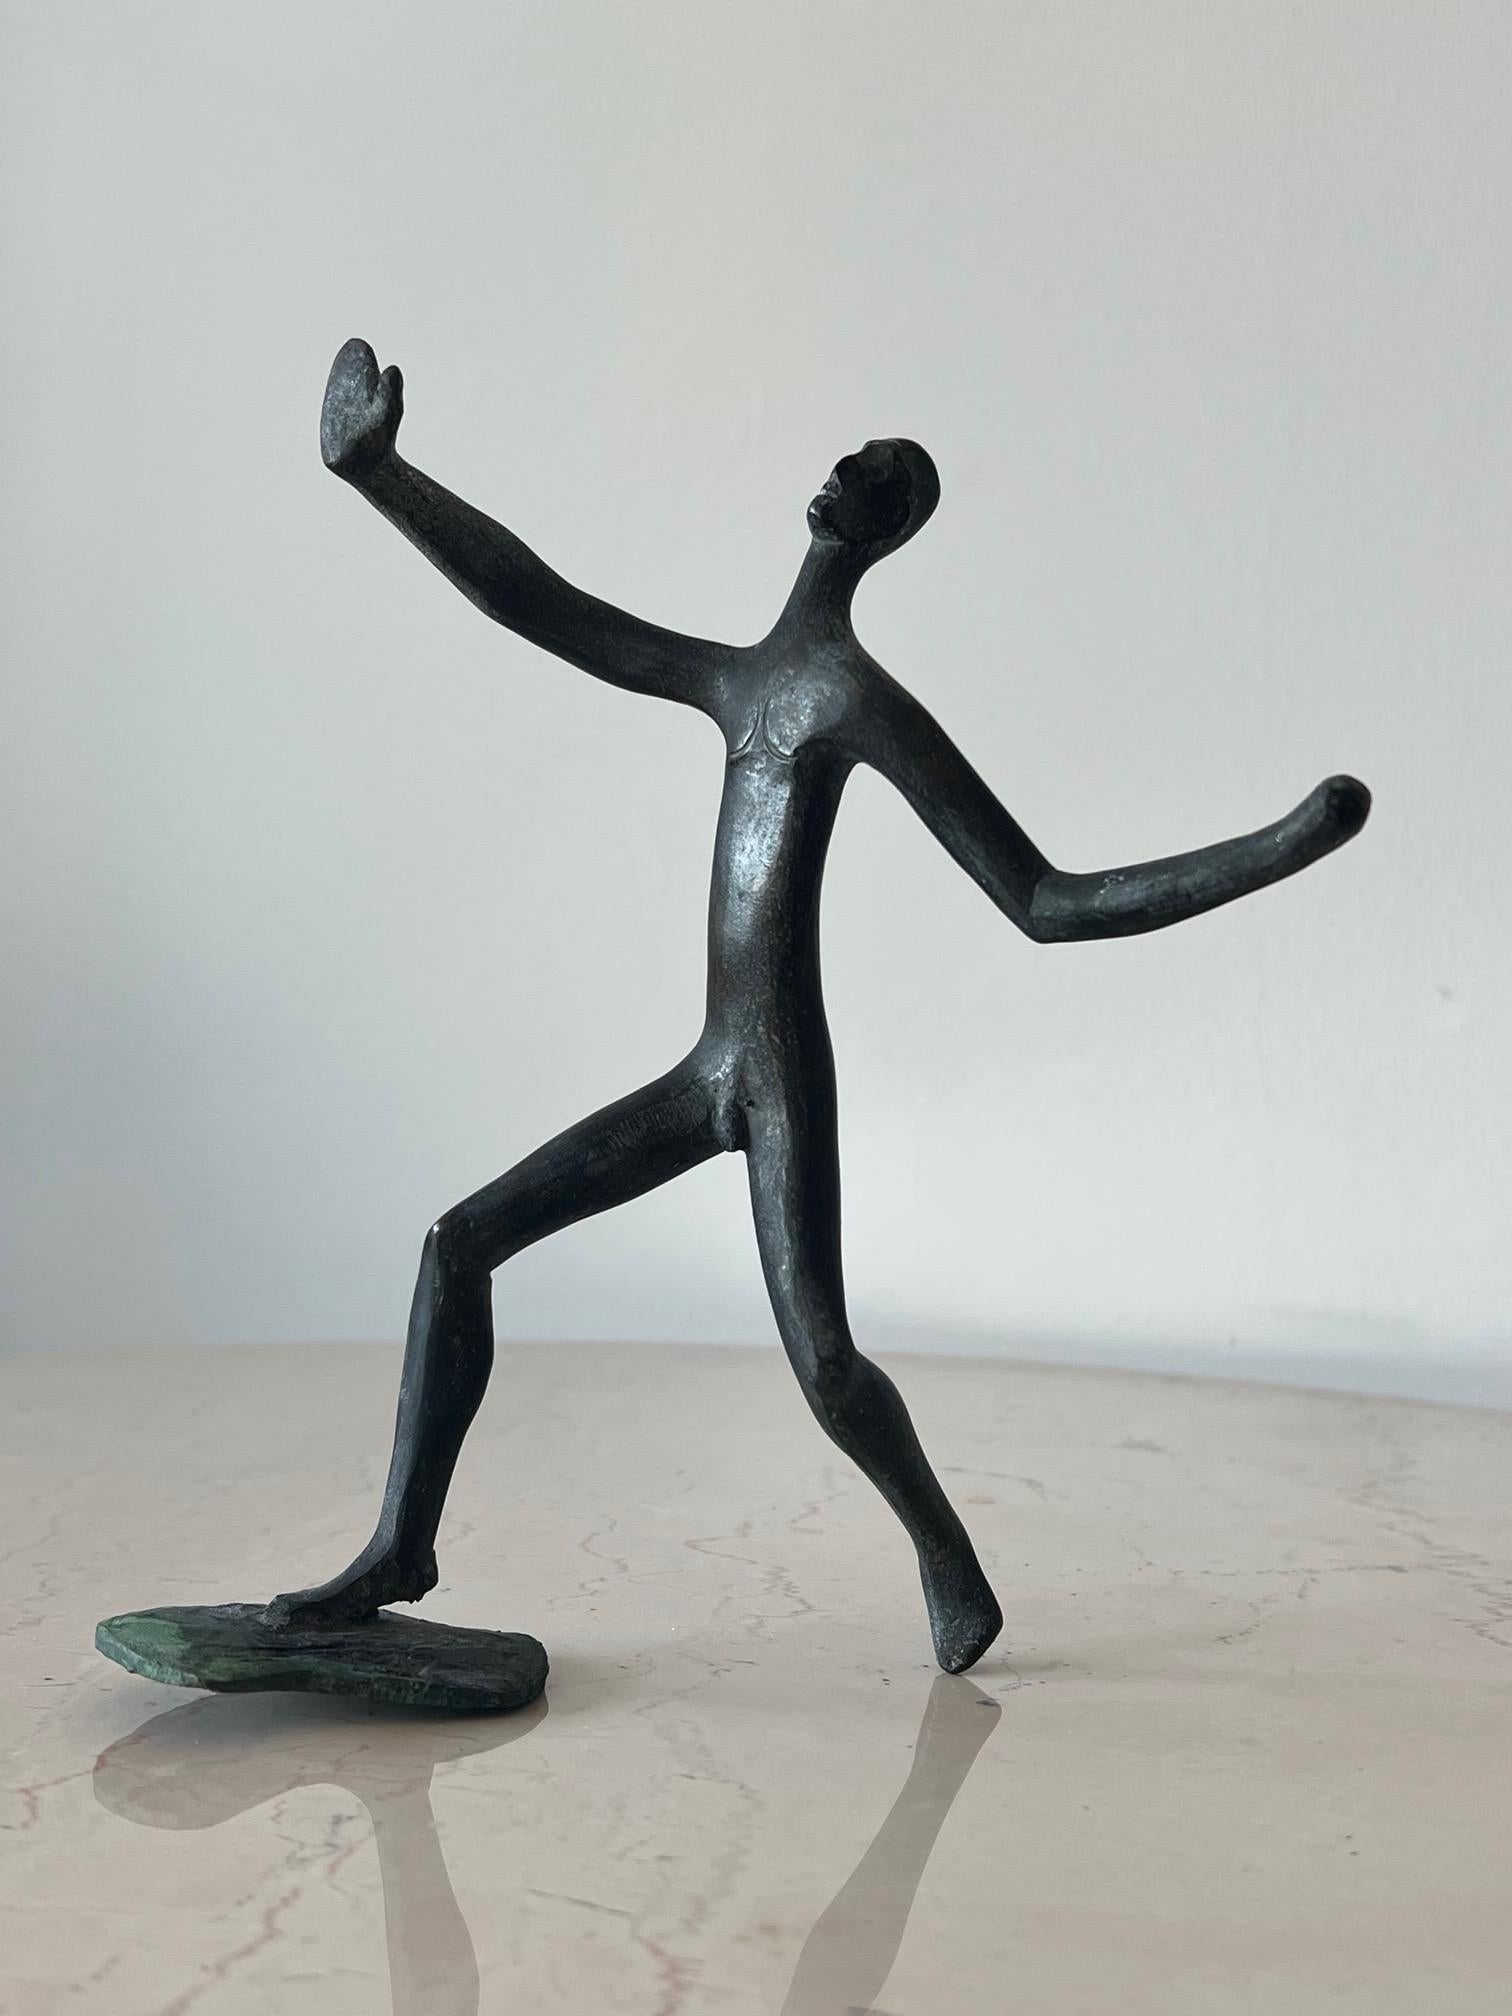 A unique, bronze sculpture of a man with outstretched hand, with timeless, Prehistoric feel by Anne Van Kleeck. From the artist's estate. A note about the artist: Anne Van Kleeck was primarily known for her works in cast bronze and ceramics. She